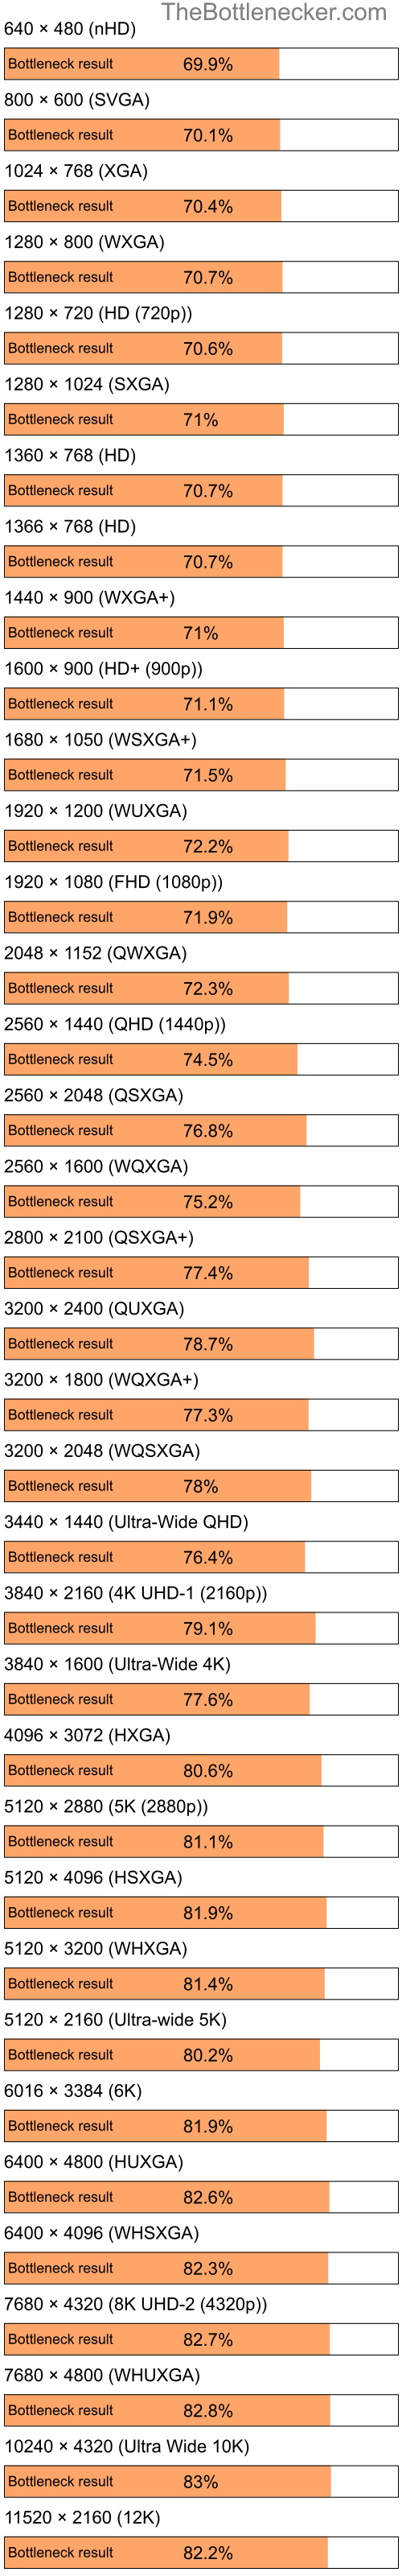 Bottleneck results by resolution for Intel Pentium 4 and AMD Mobility Radeon X700 in General Tasks